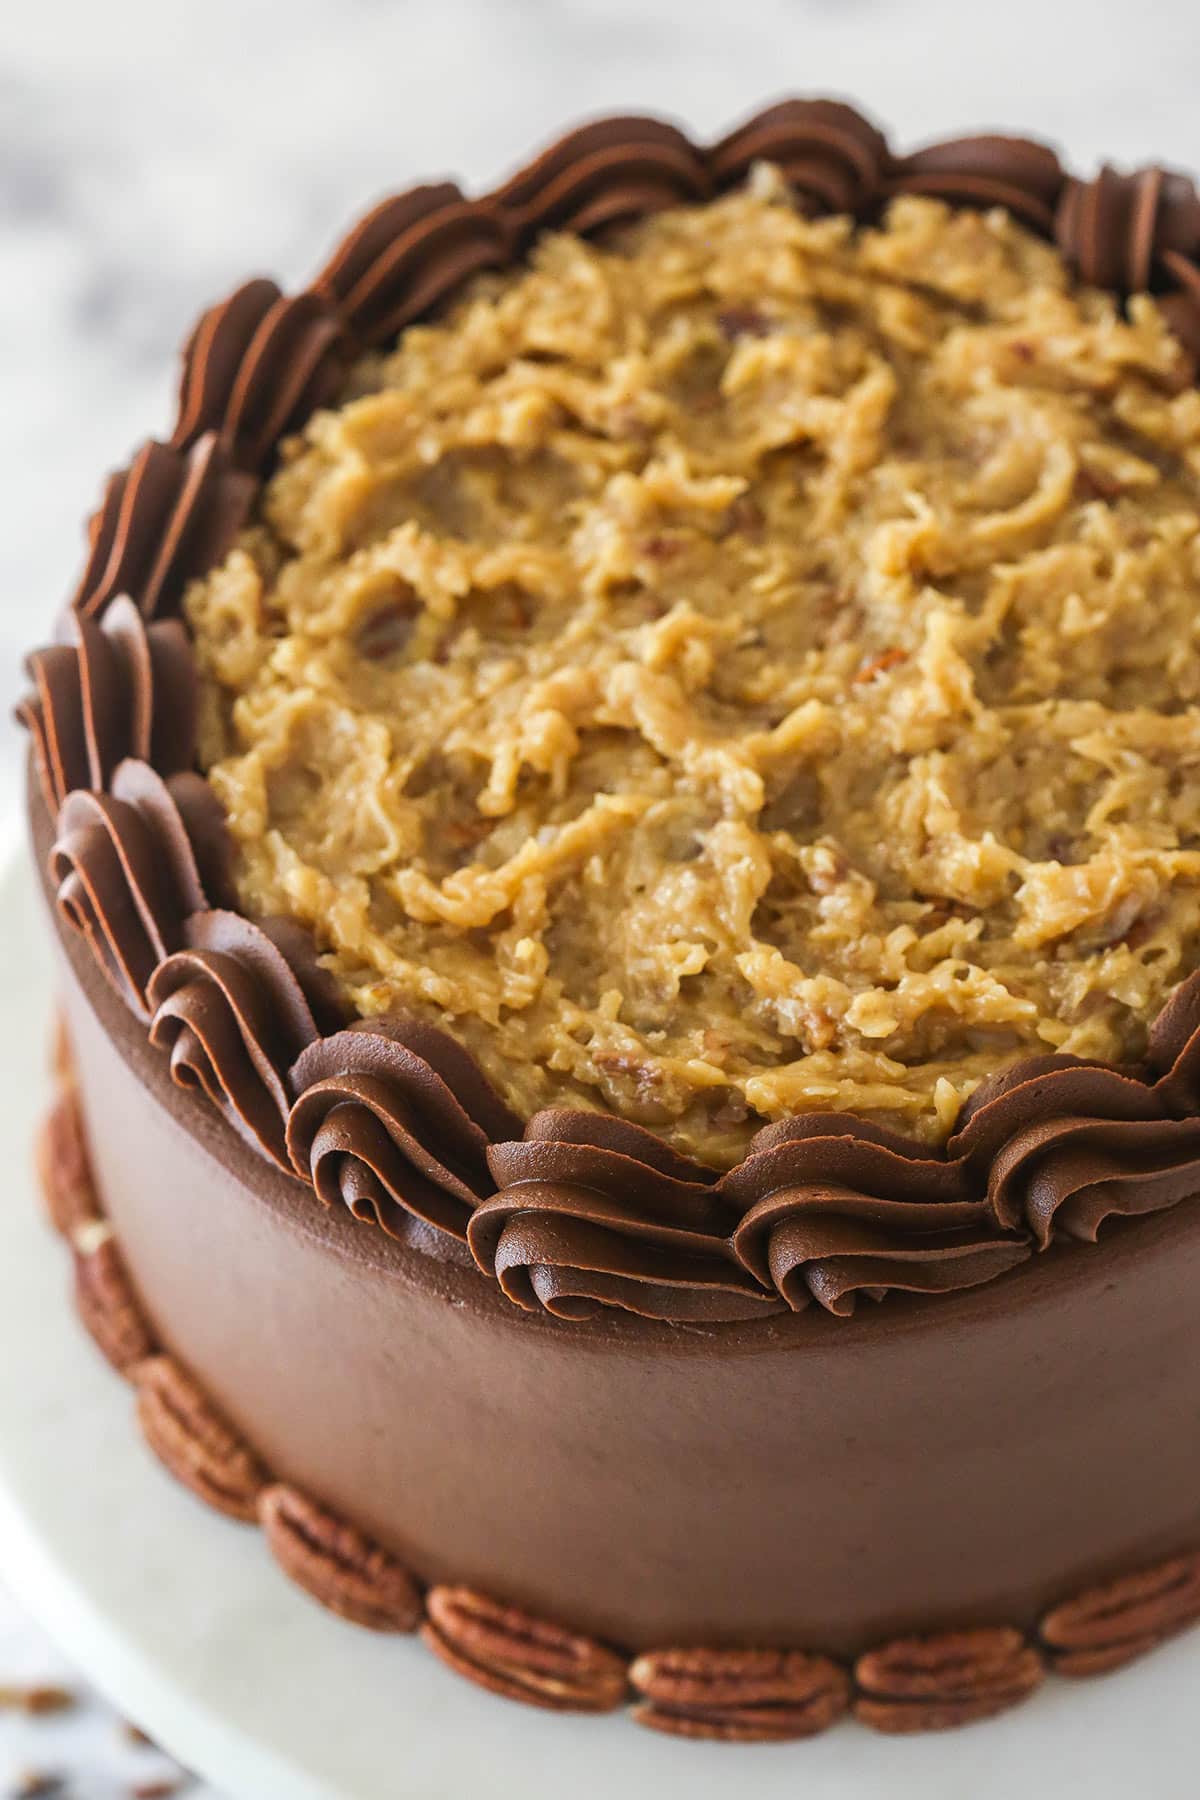 Classic German Chocolate Cake - The Chocolate Dessert of Your Dreams